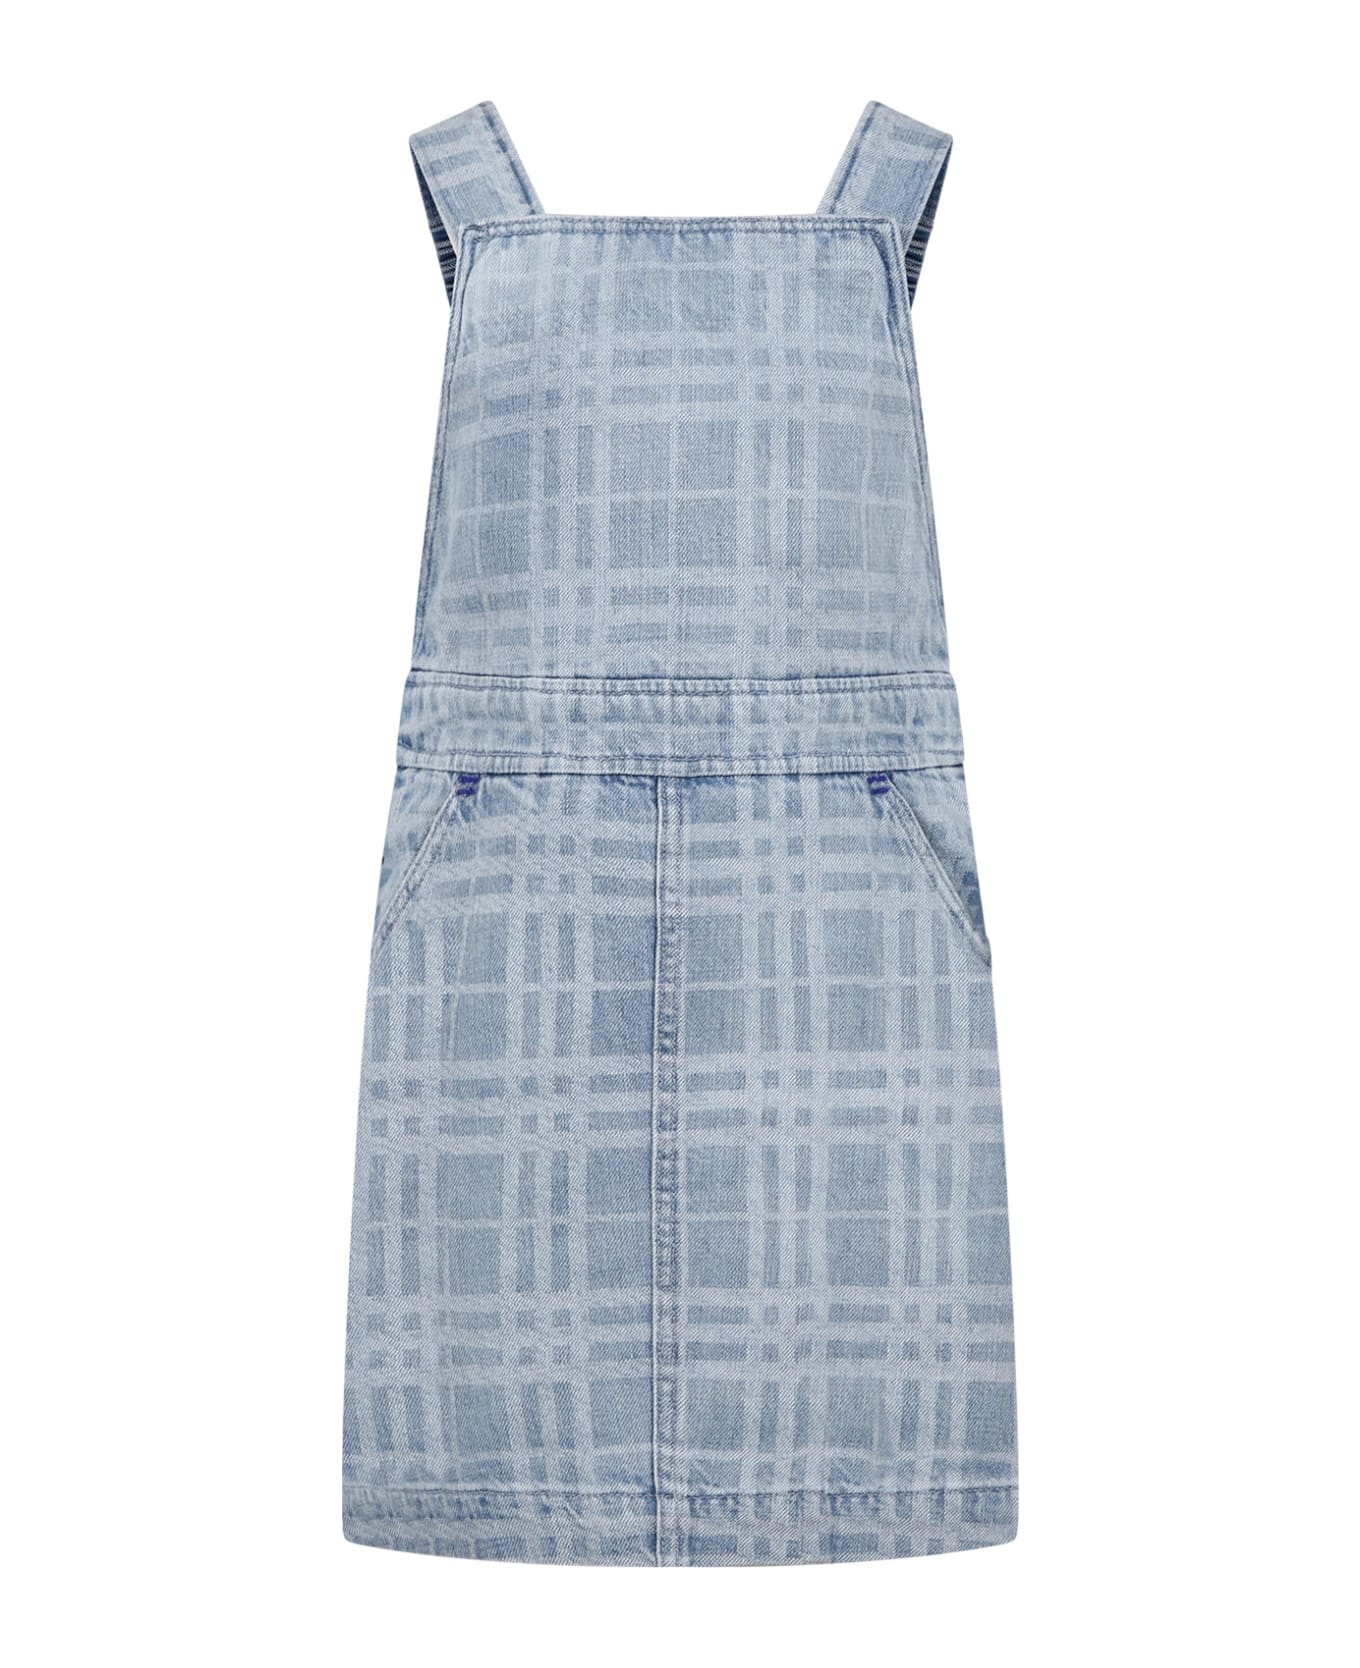 Burberry Denim Dungarees For Girl With Iconic All-over Check